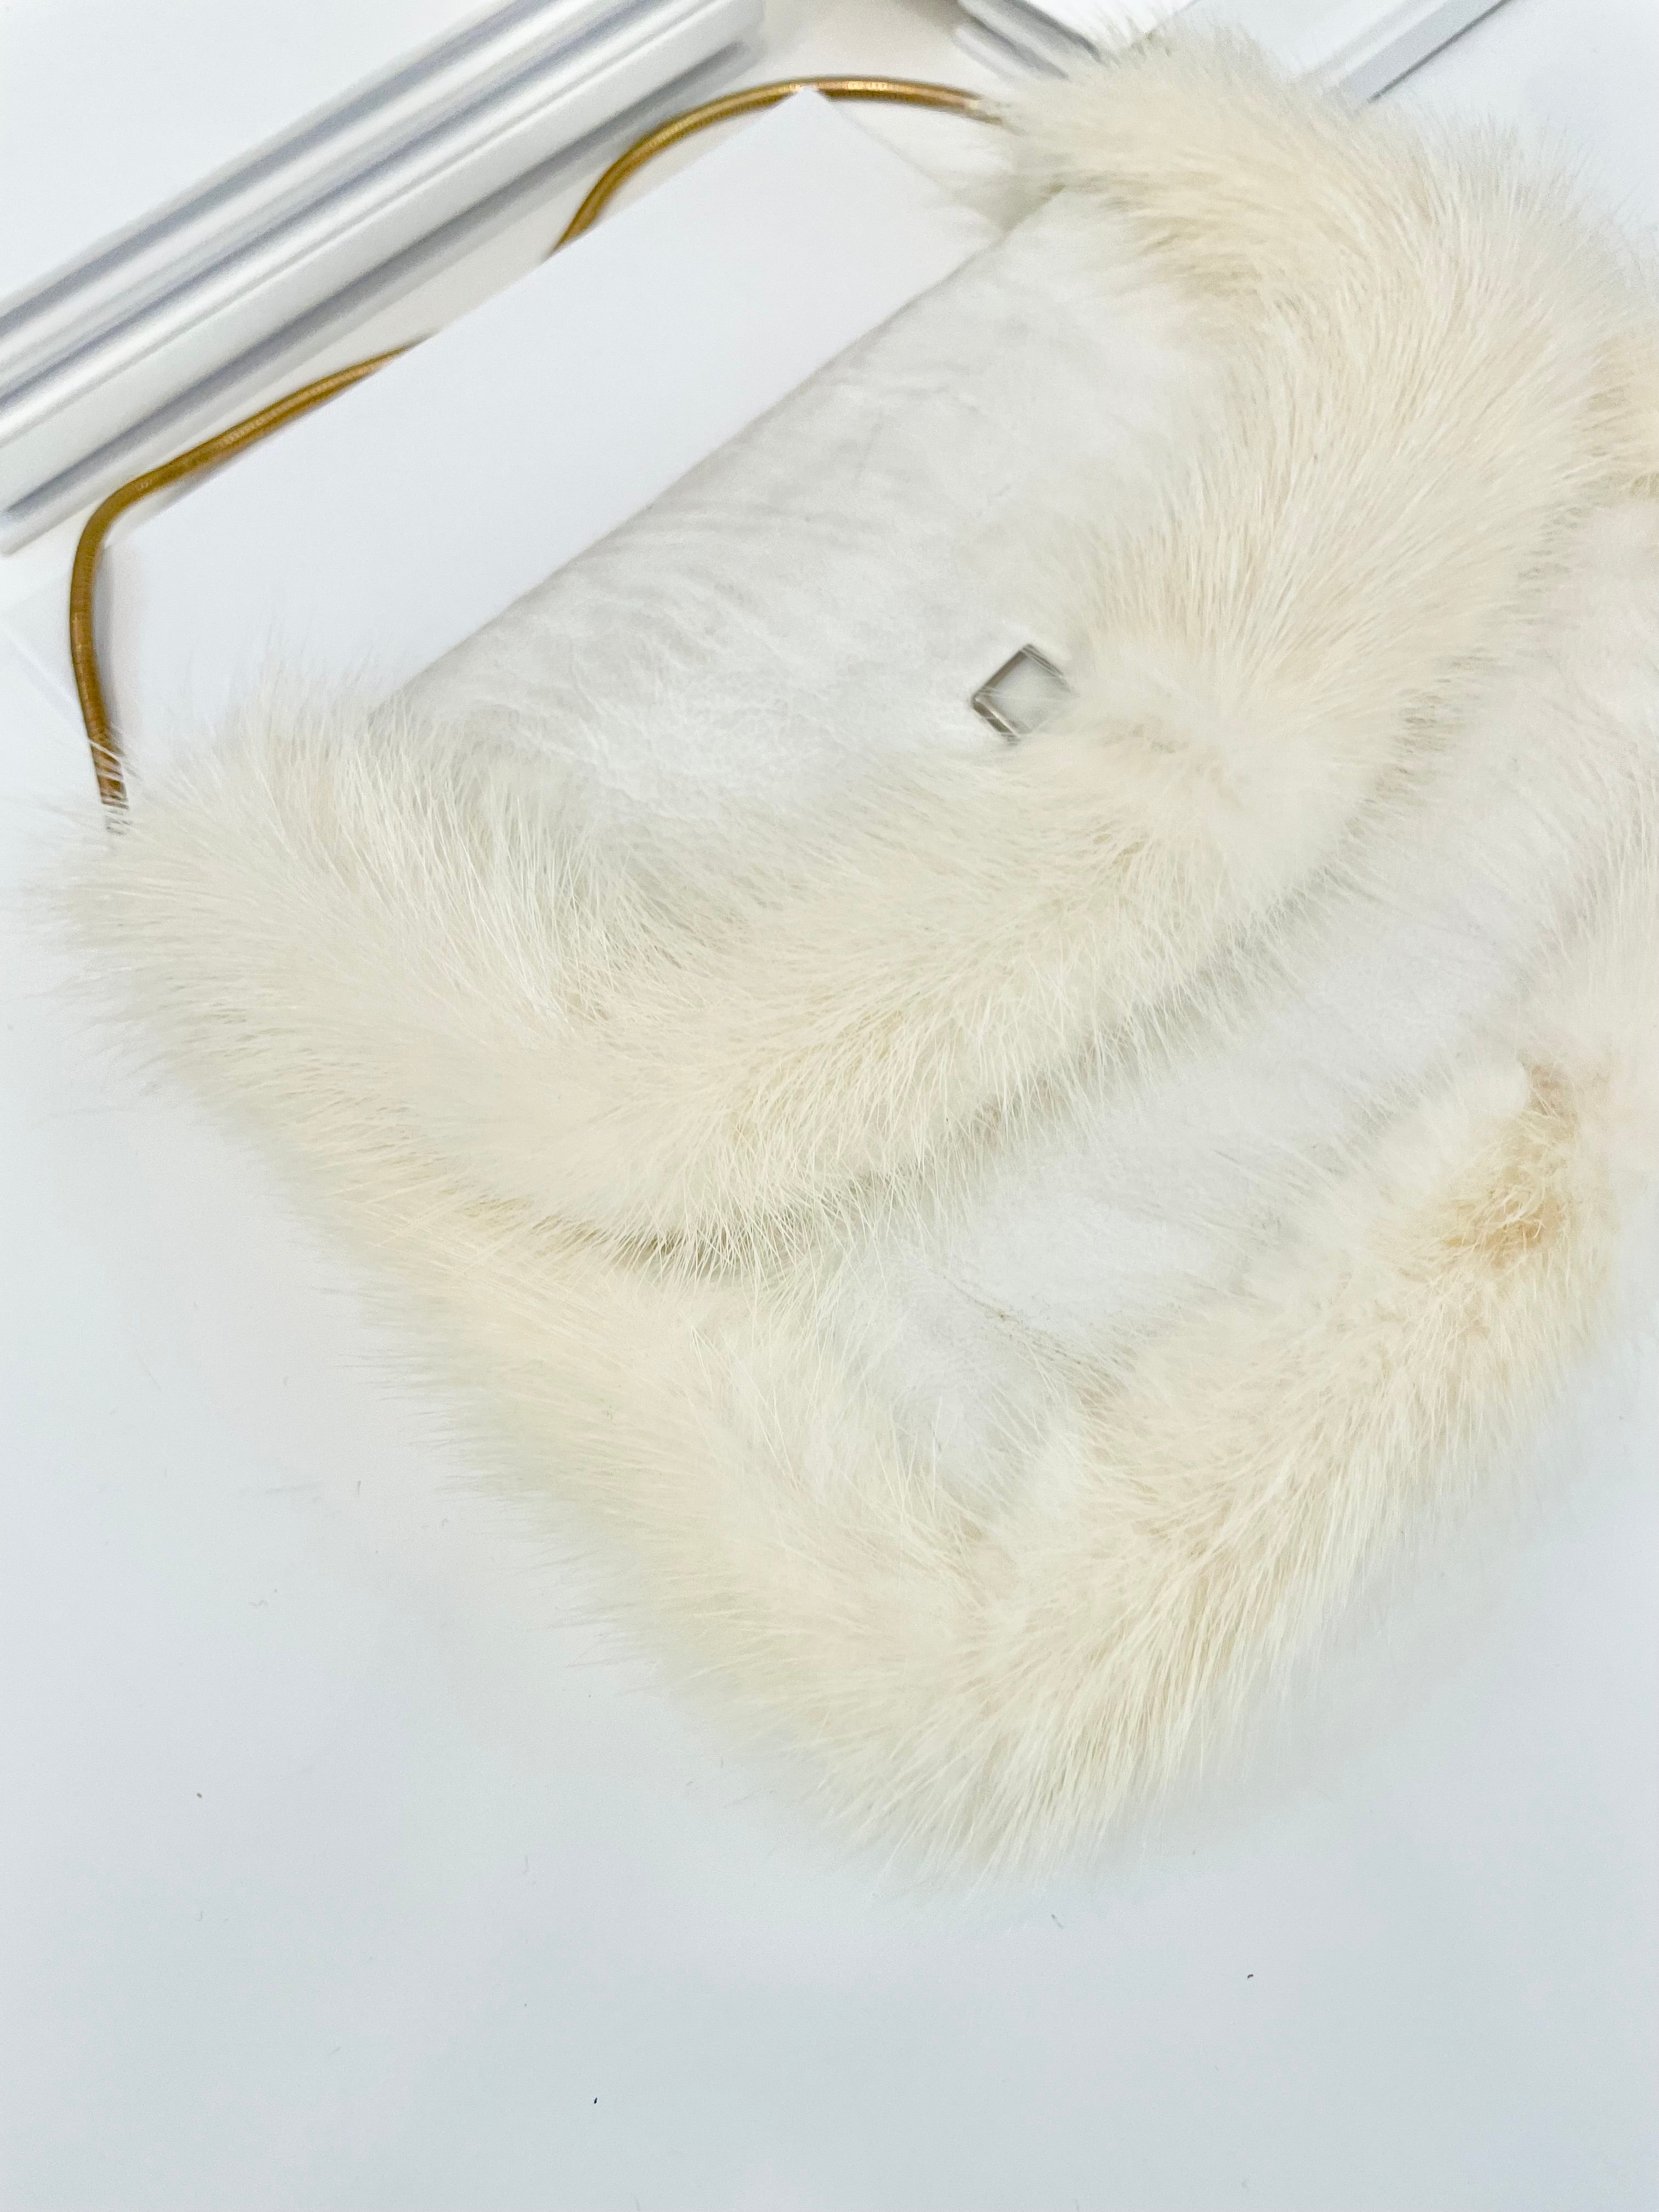 The 1960's heiress adores a fur clutch bag.... this one is so glamorous!